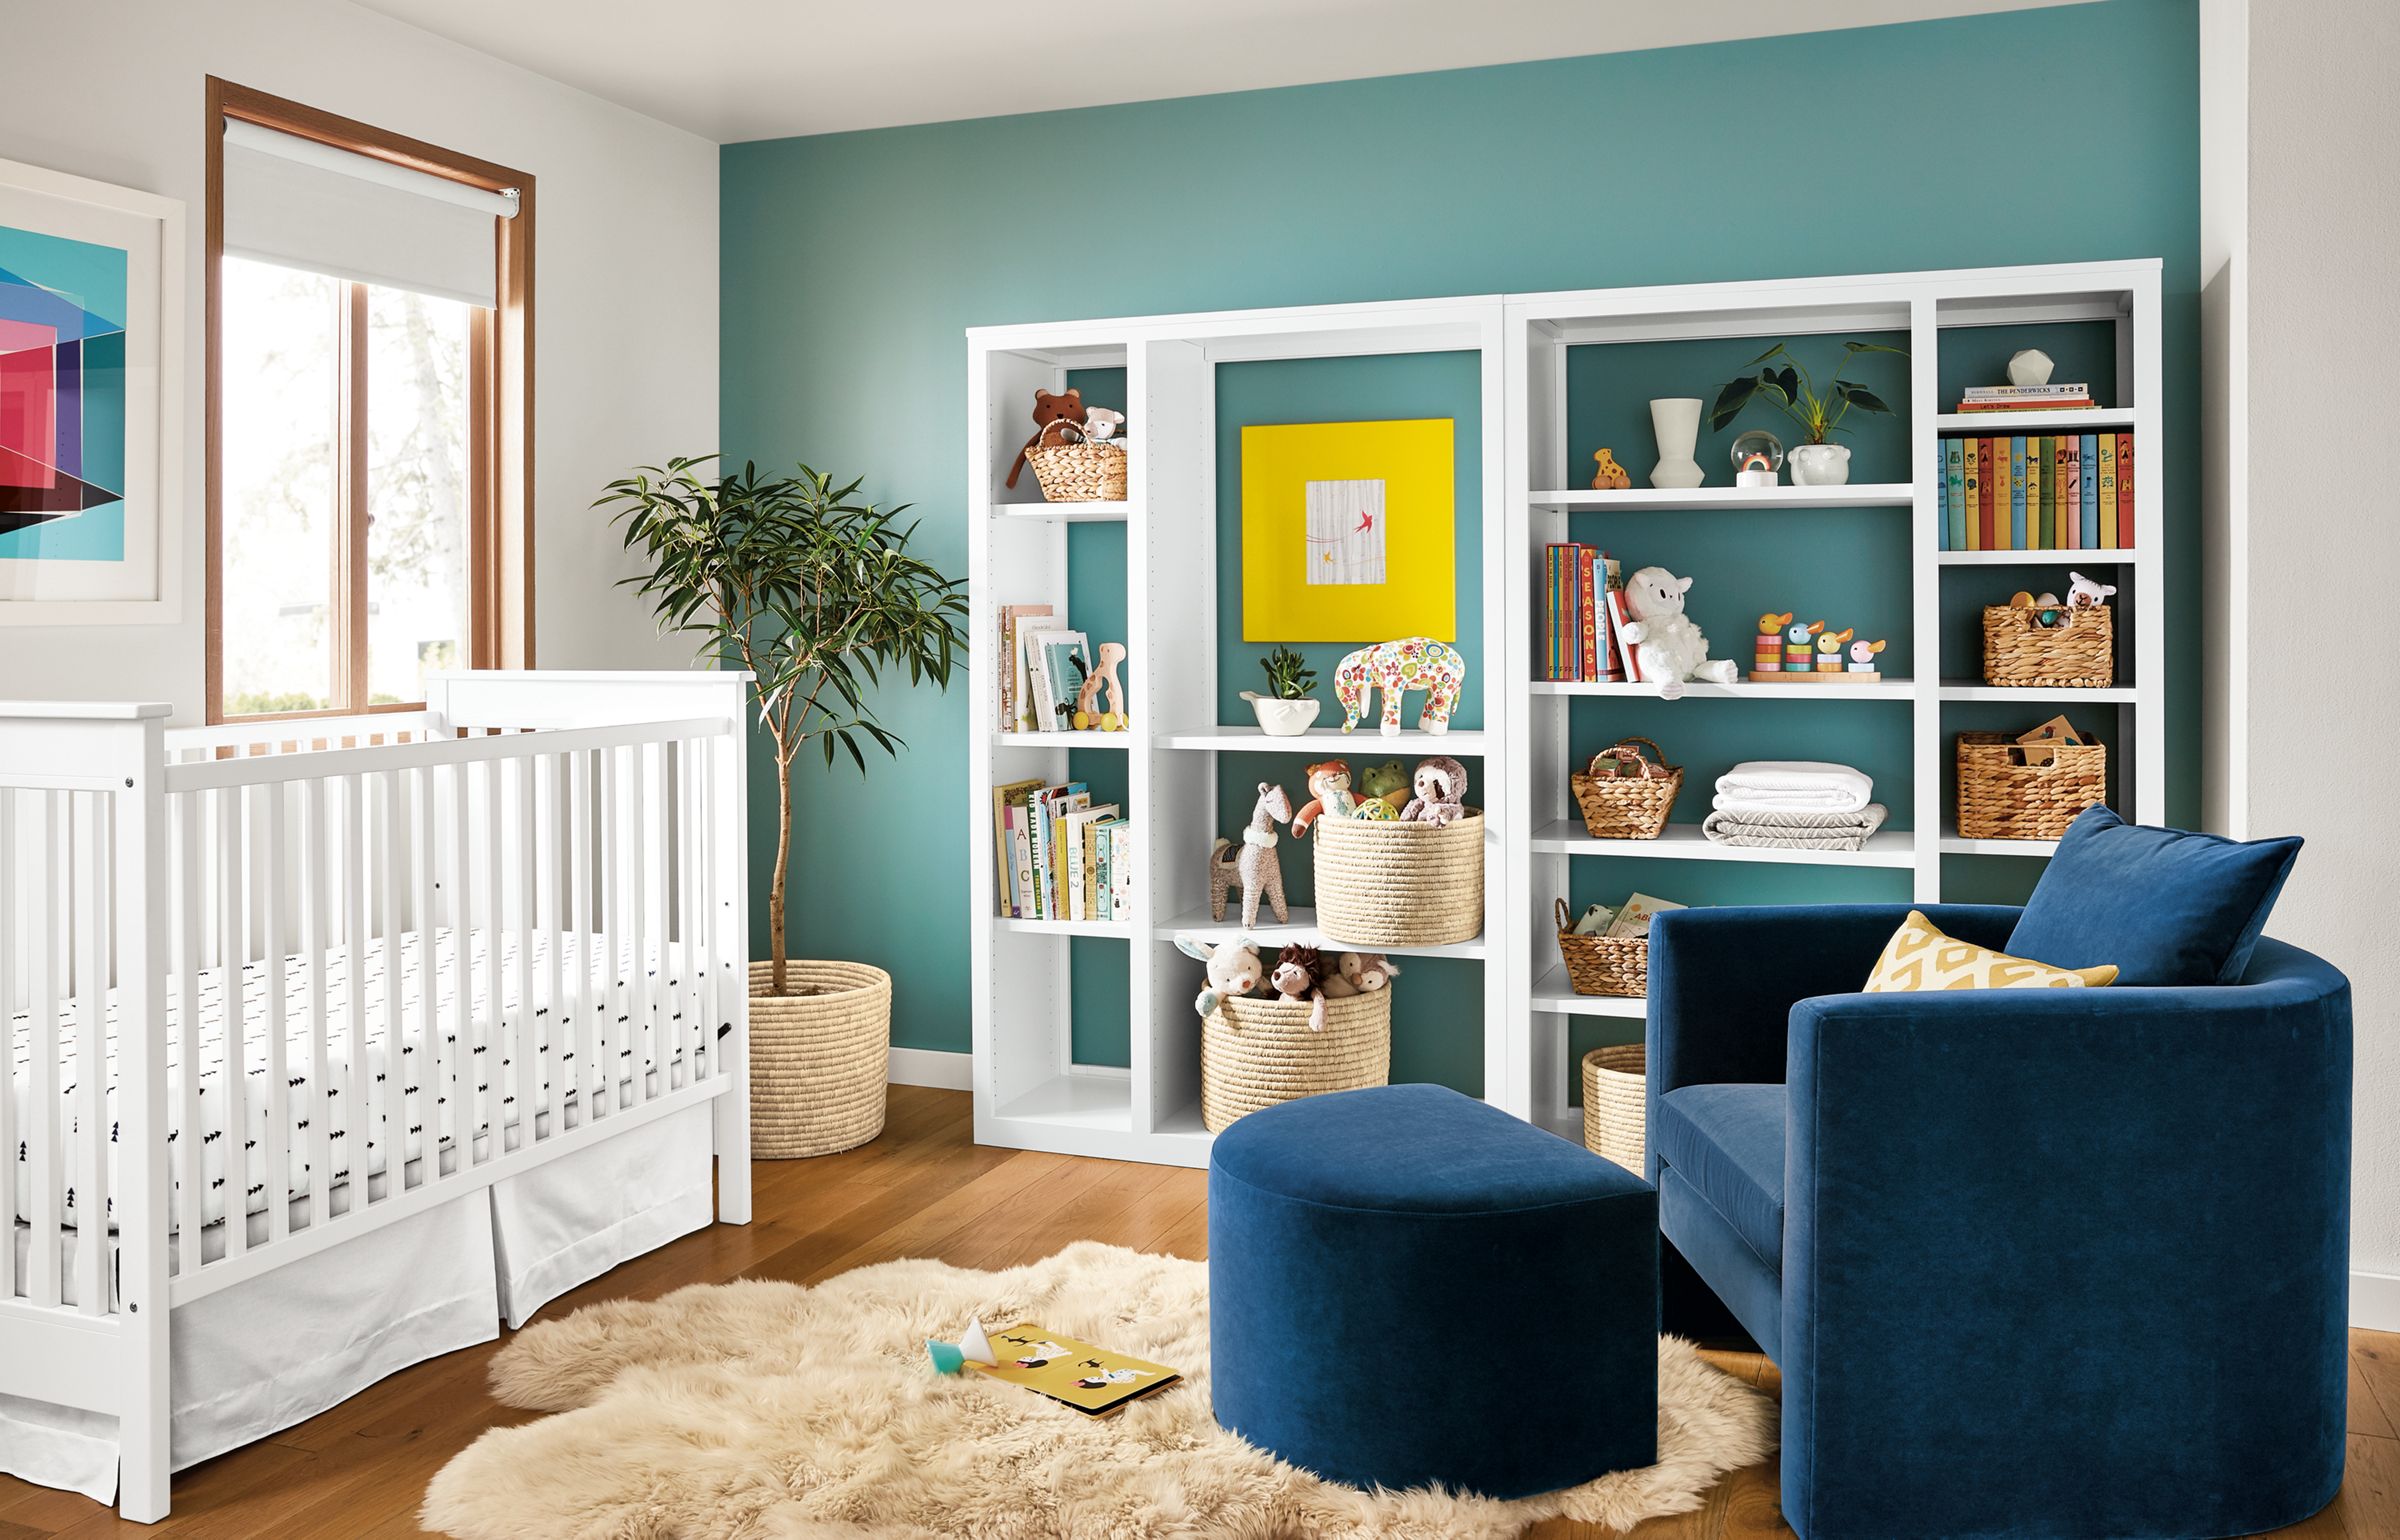 Detail of Woodwind open back bookcases in kids bedroom with Silva chair and Nest crib.